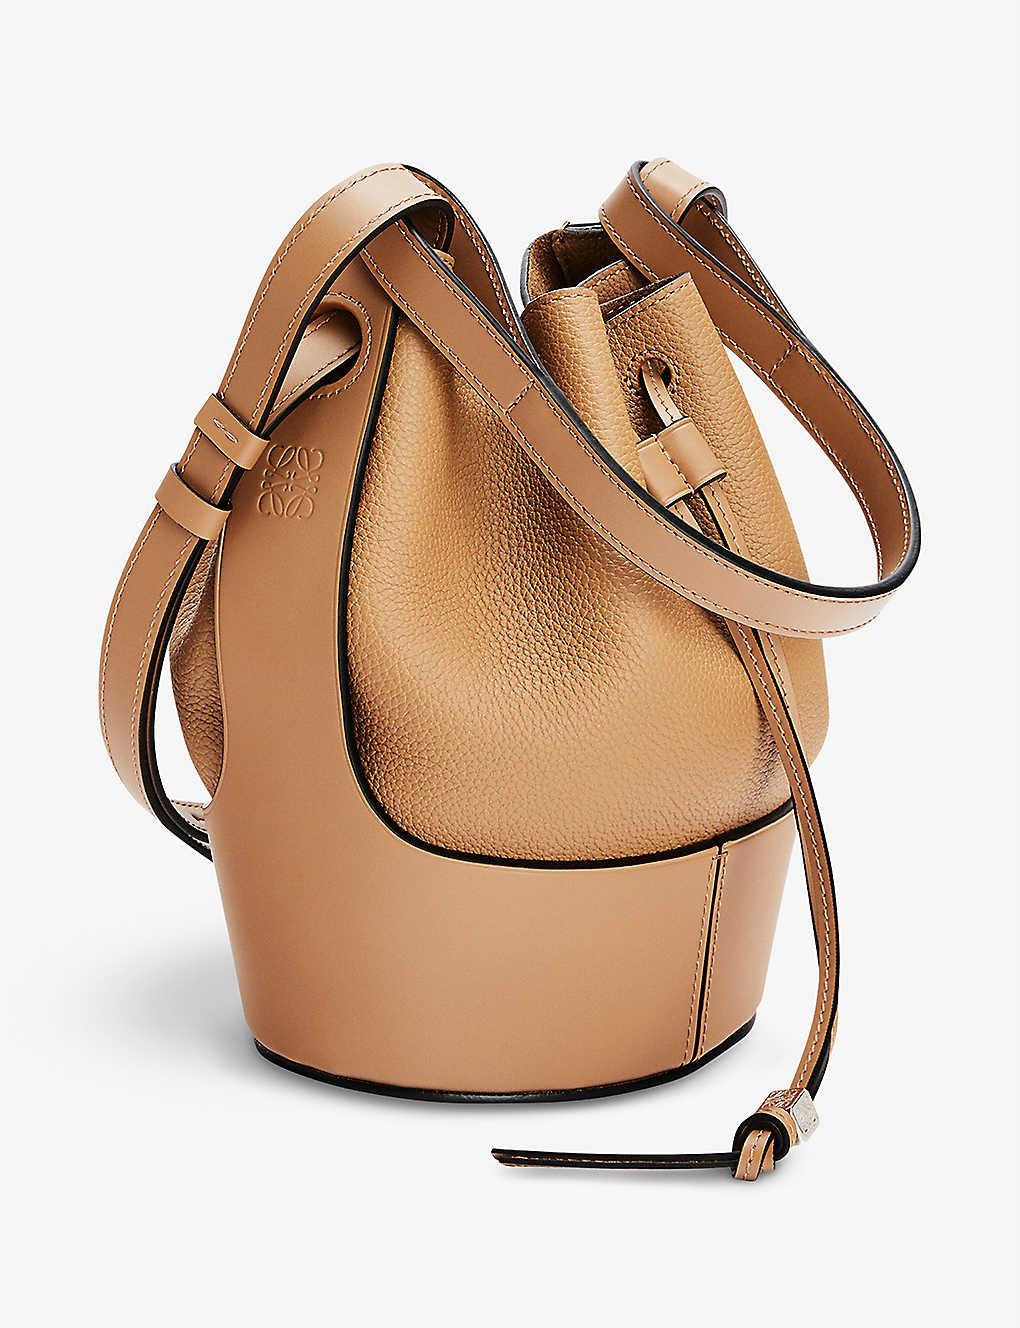 Loewe Balloon Small Leather Shoulder Bag in Natural | Lyst